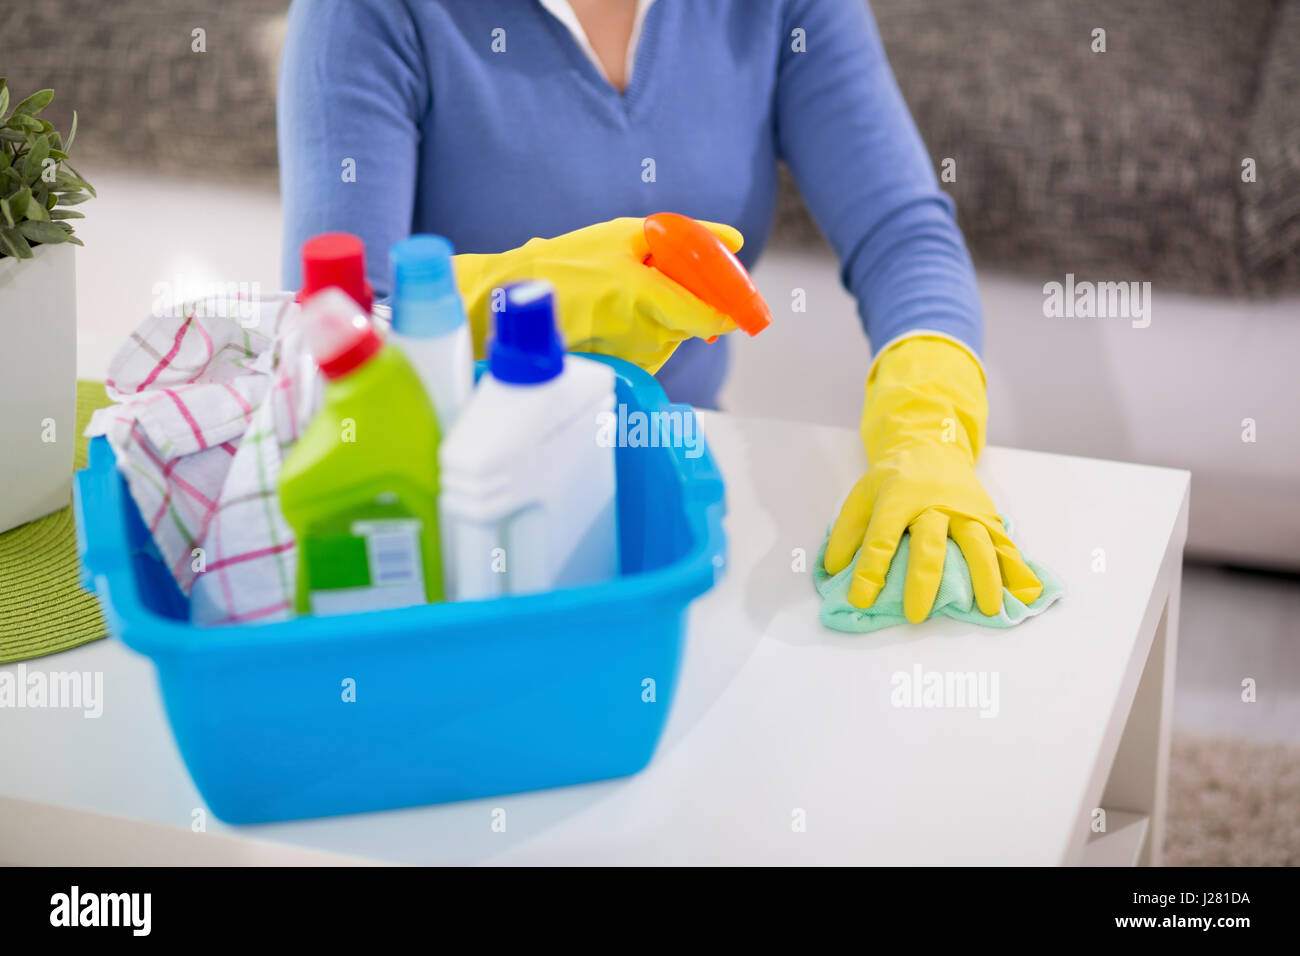 Woman clean table with products for cleaning Stock Photo